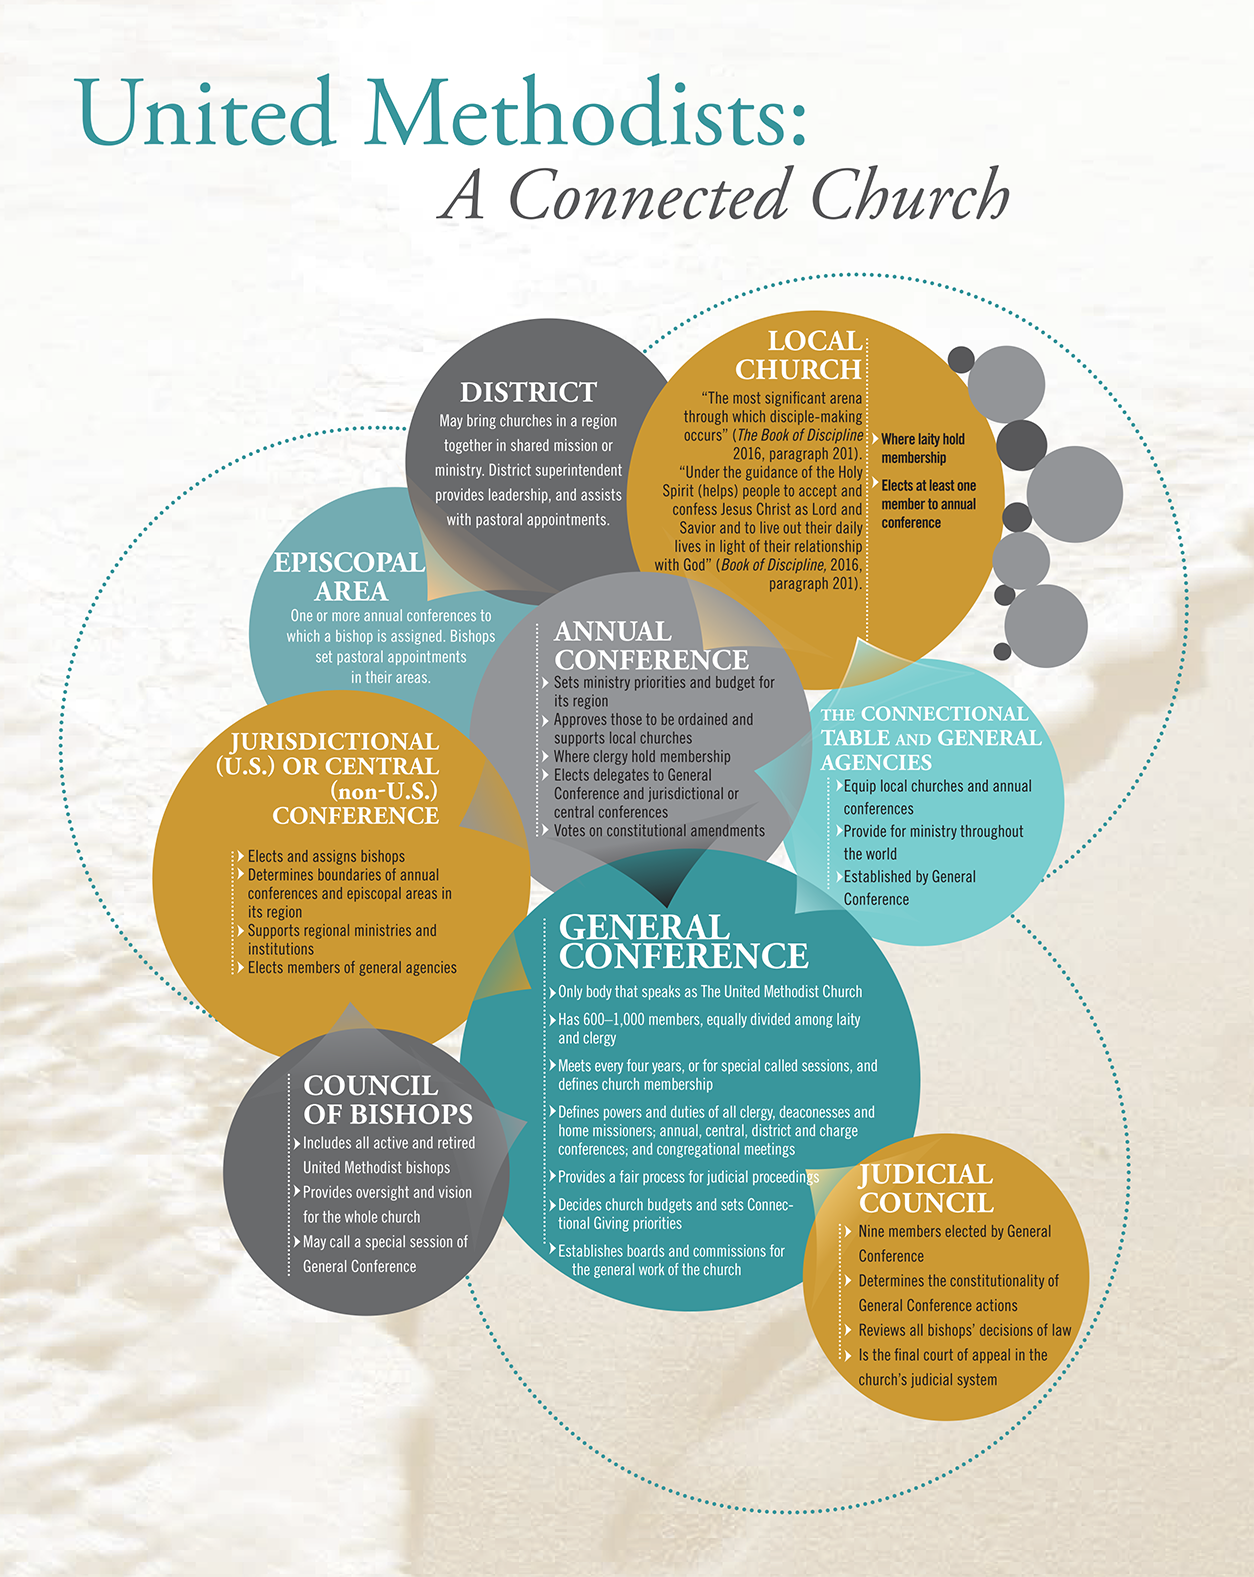 The connectional structure of The United Methodist Church. Infographic from The United Methodist Handbook, courtesy of United Methodist Communications. 